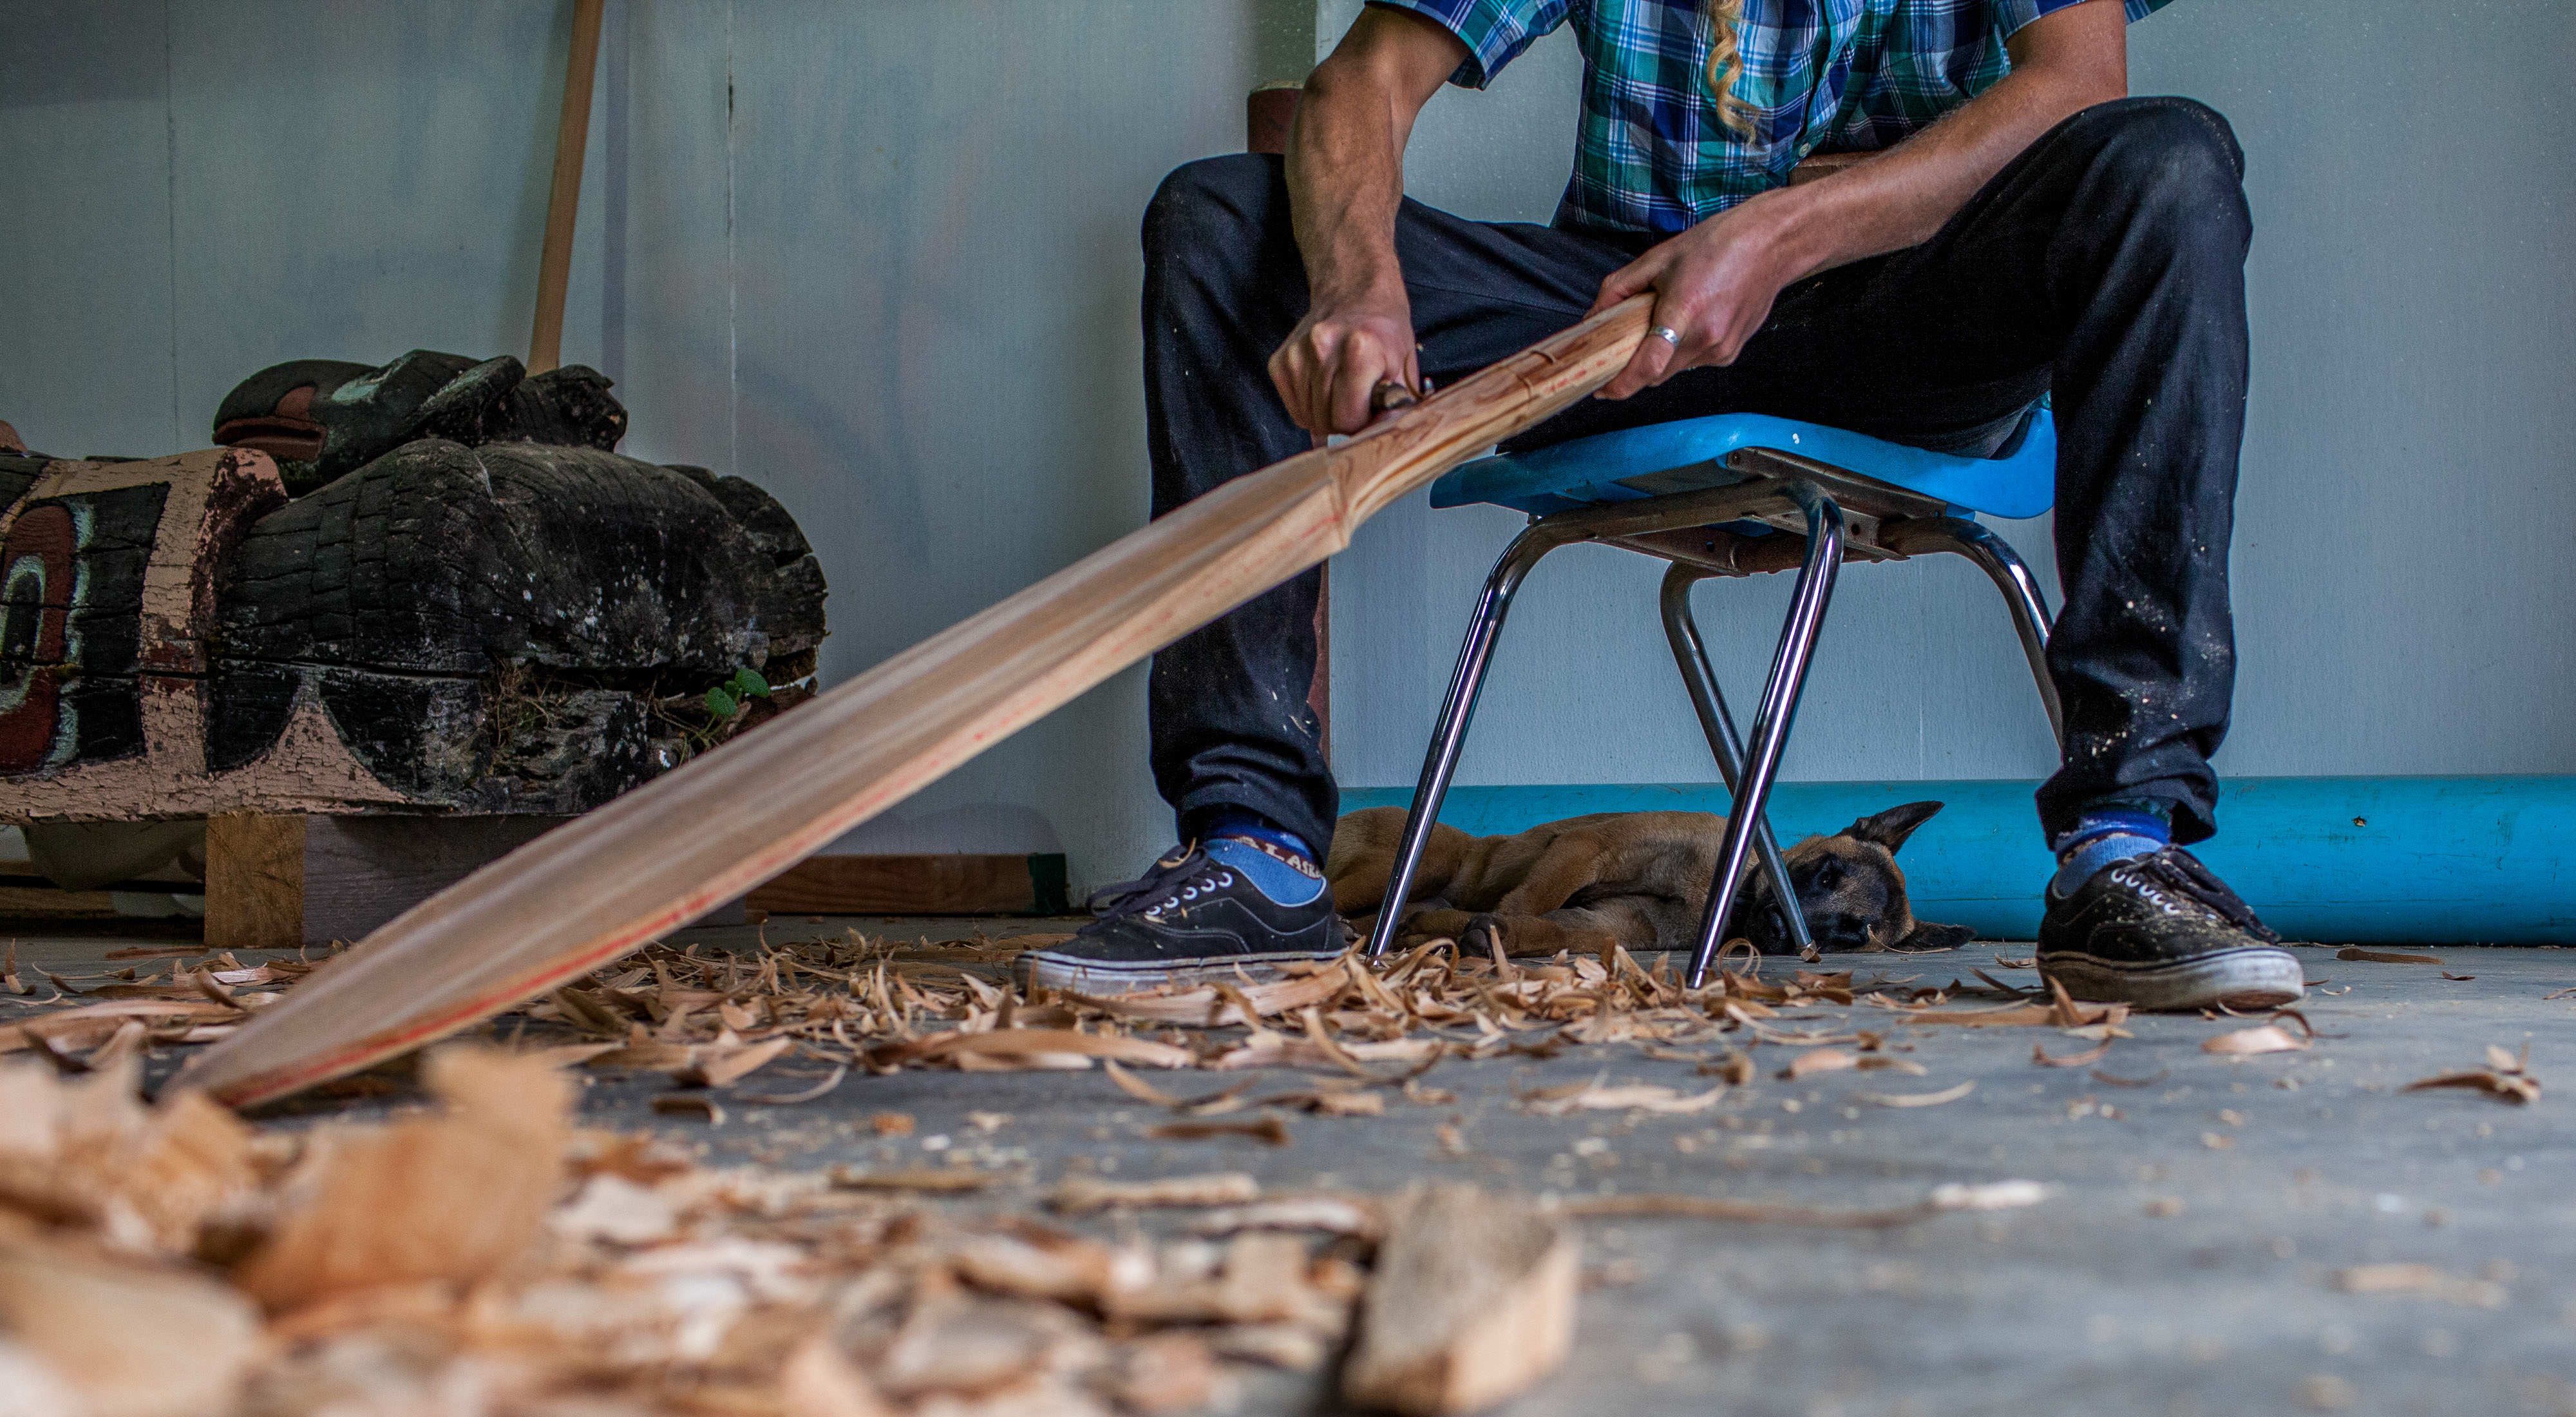 Carving a canoe paddle by hand